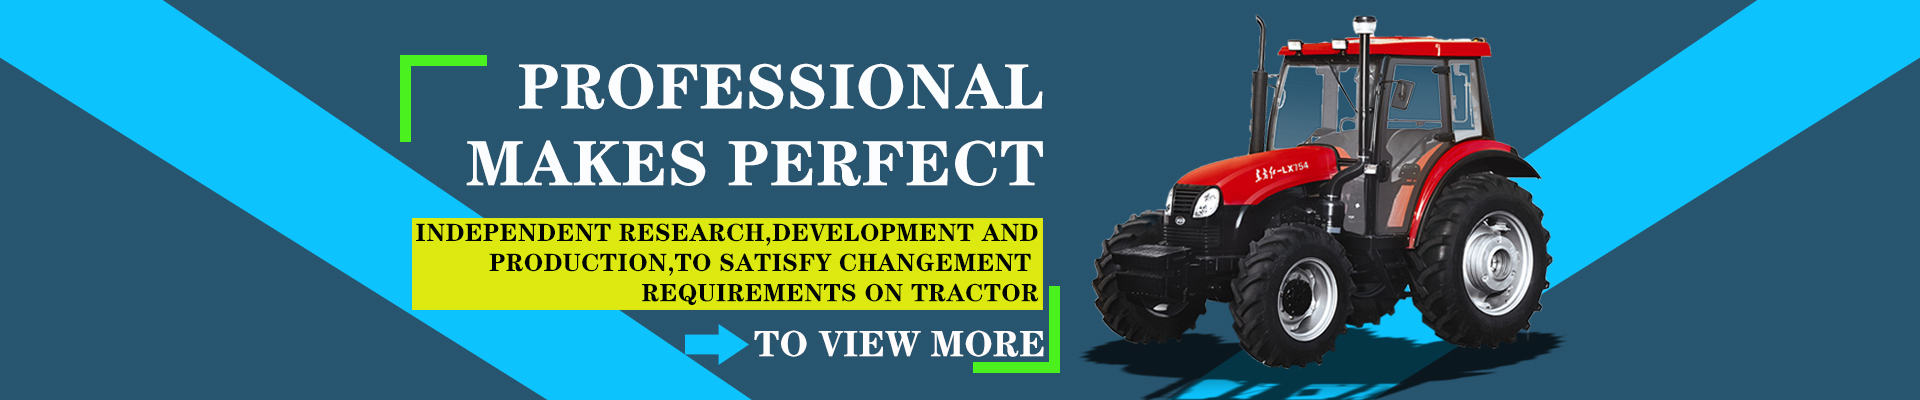 Agriculture Machinery&Equipment